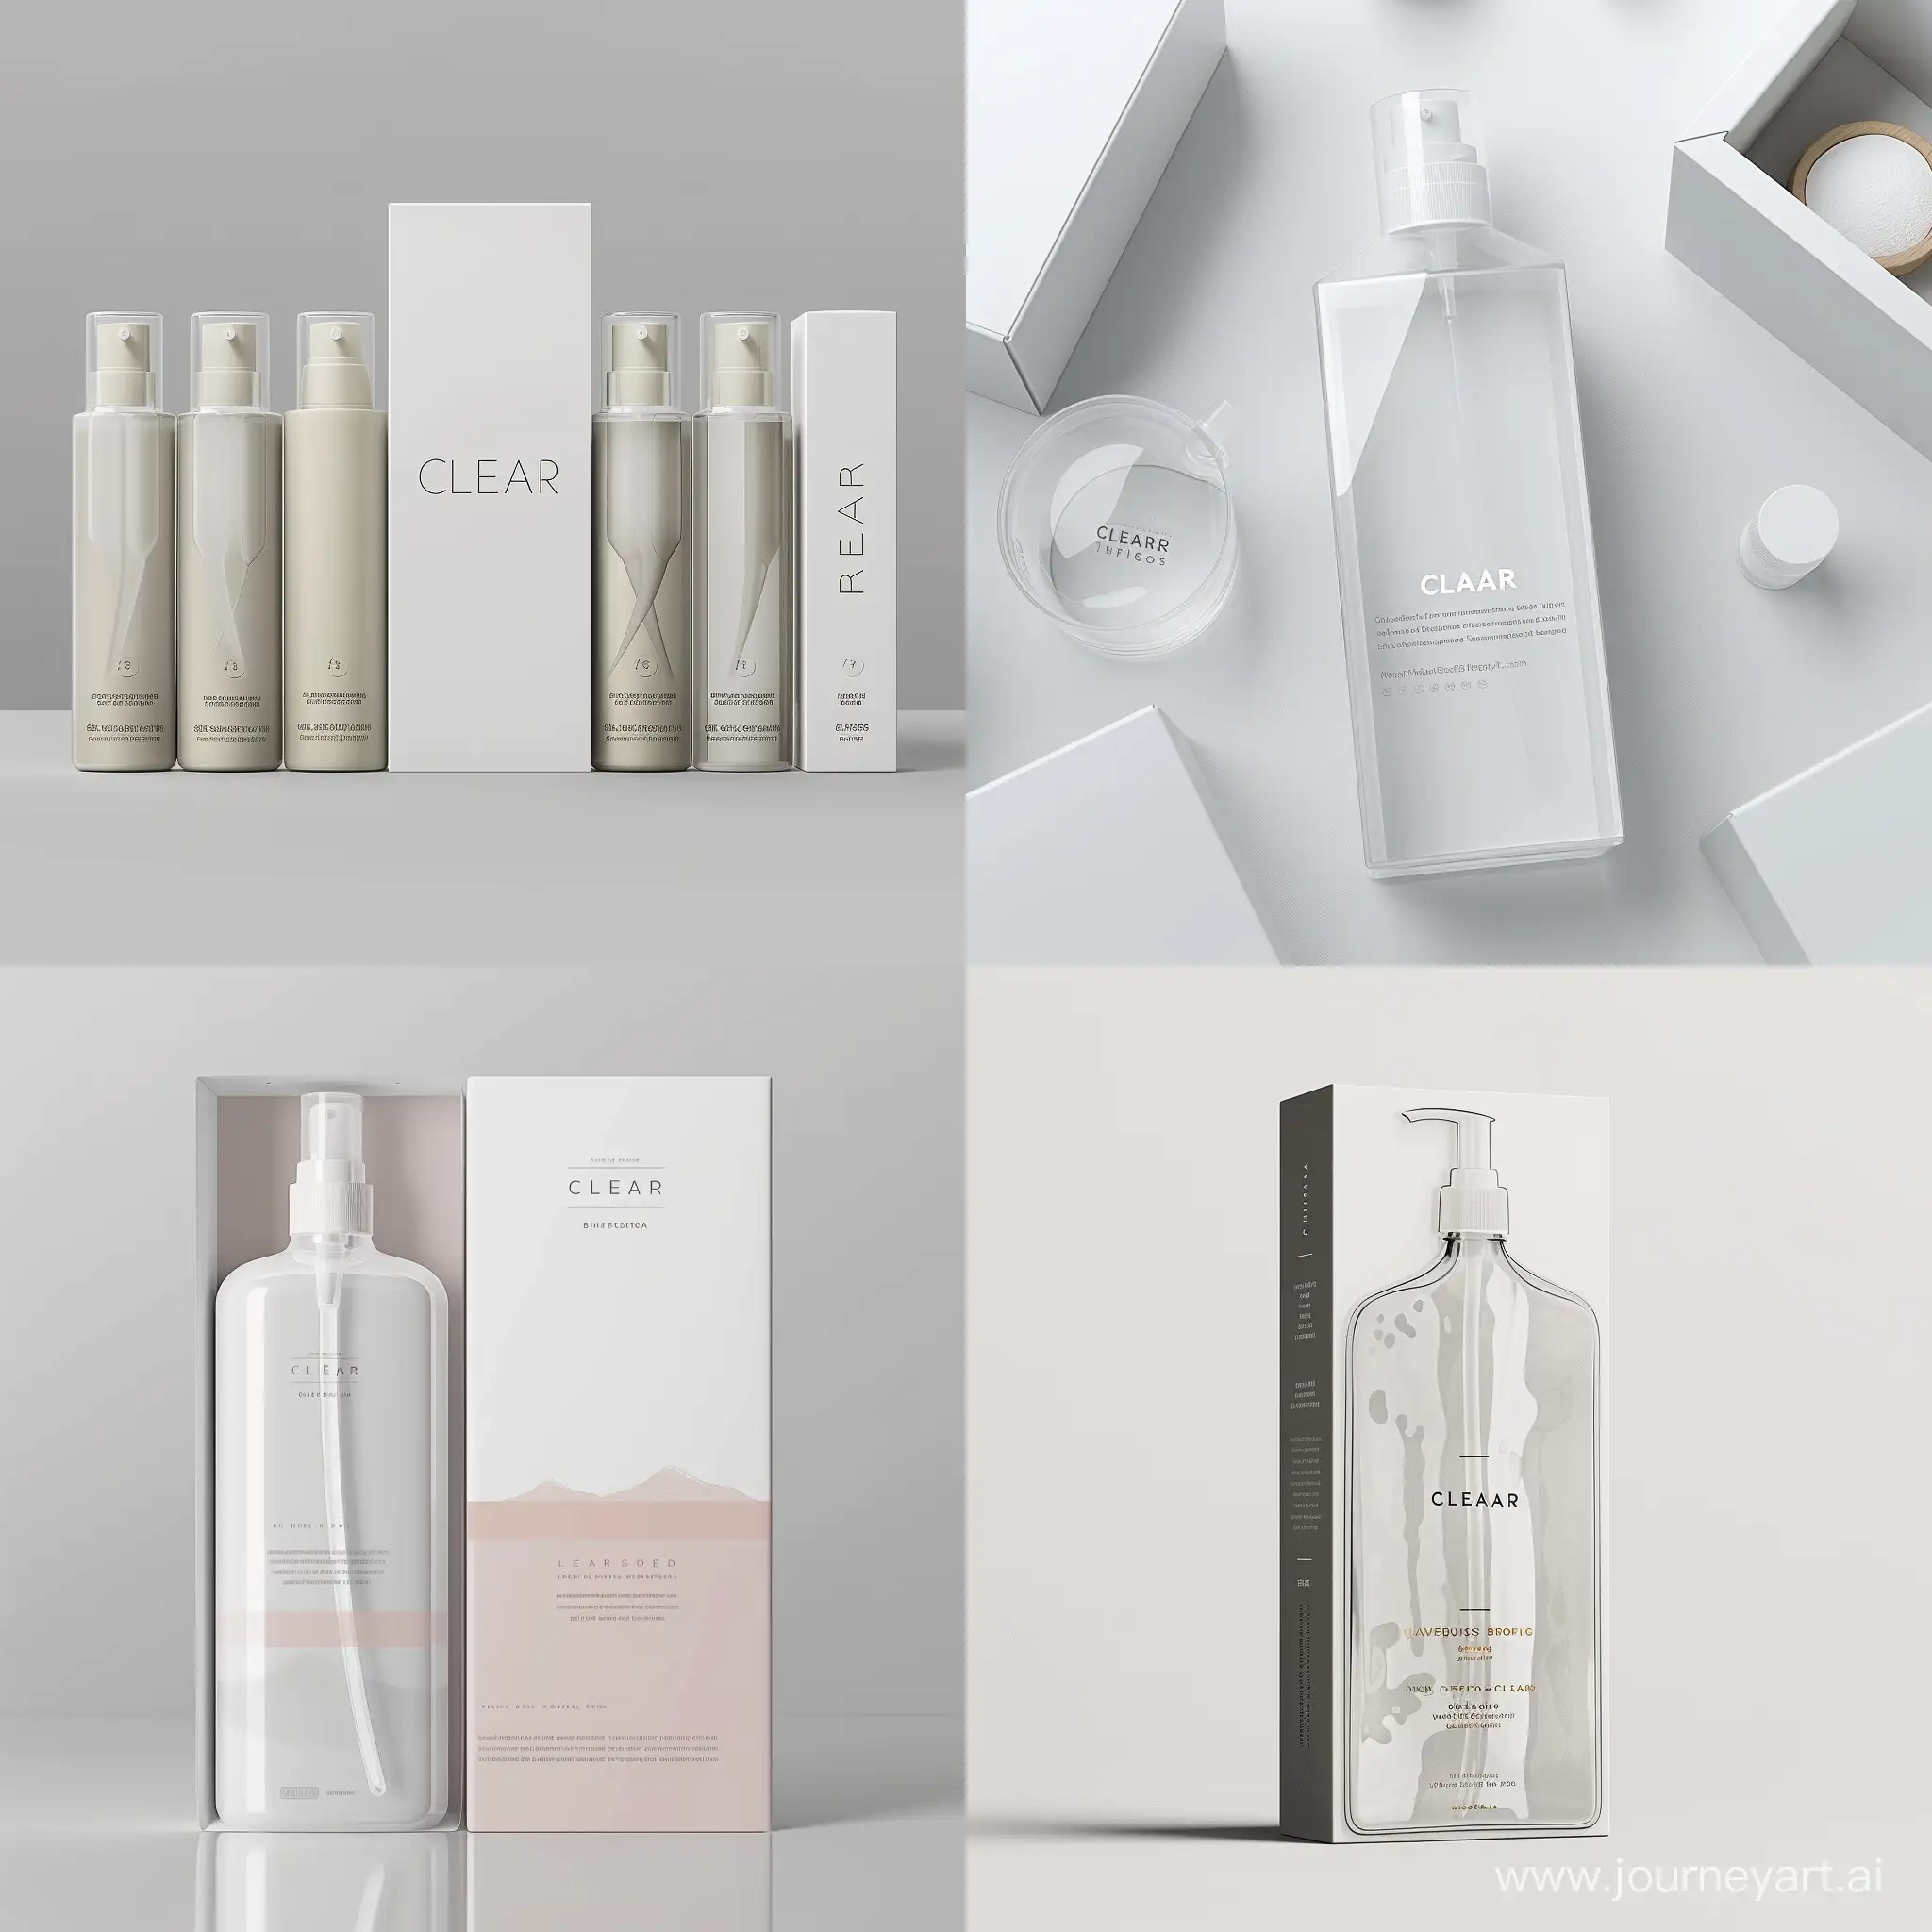 Sleek-and-Minimalistic-Packaging-Design-for-CLEAR-Shampoo-Bottle